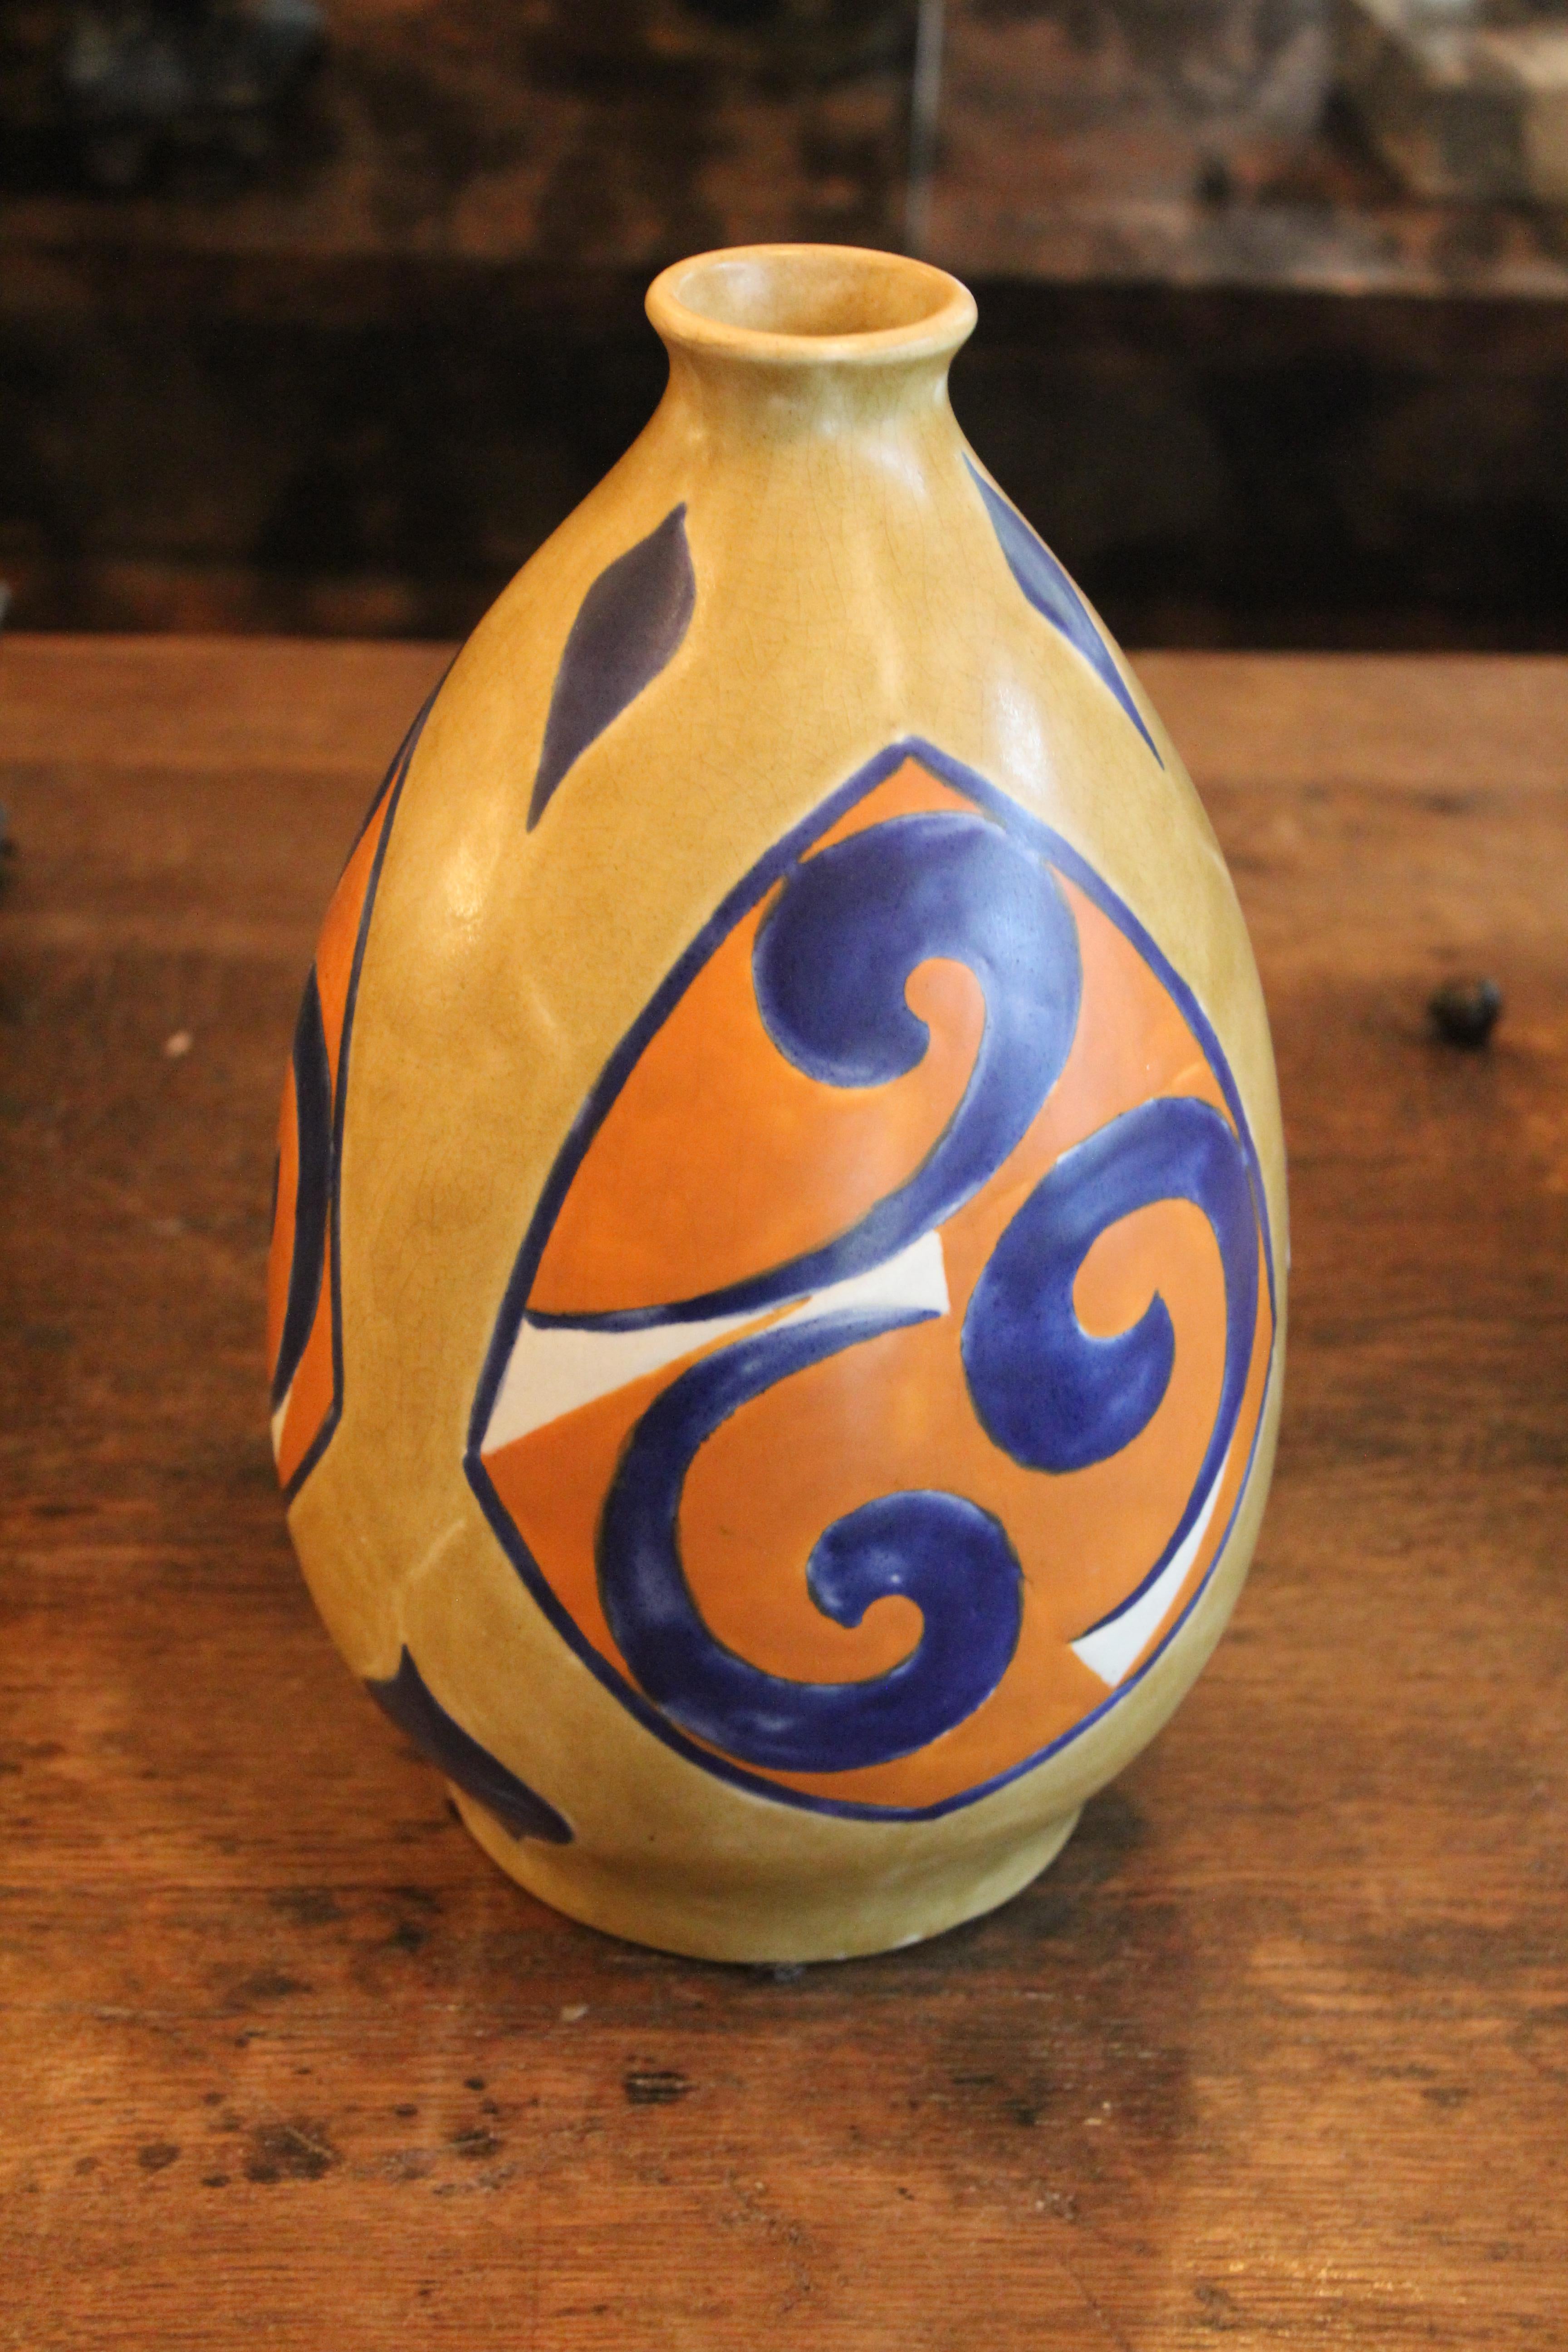 F. Moreau Art Deco Belgium pottery vase
Whimsical F. Moreau Art Deco Belgium pottery vase. It is in the style of Cateau by Boche Frere. The colors are rich and washed on in a hand painted style. 10.25” tall by 6.5” wide (+/-). Start or add to your